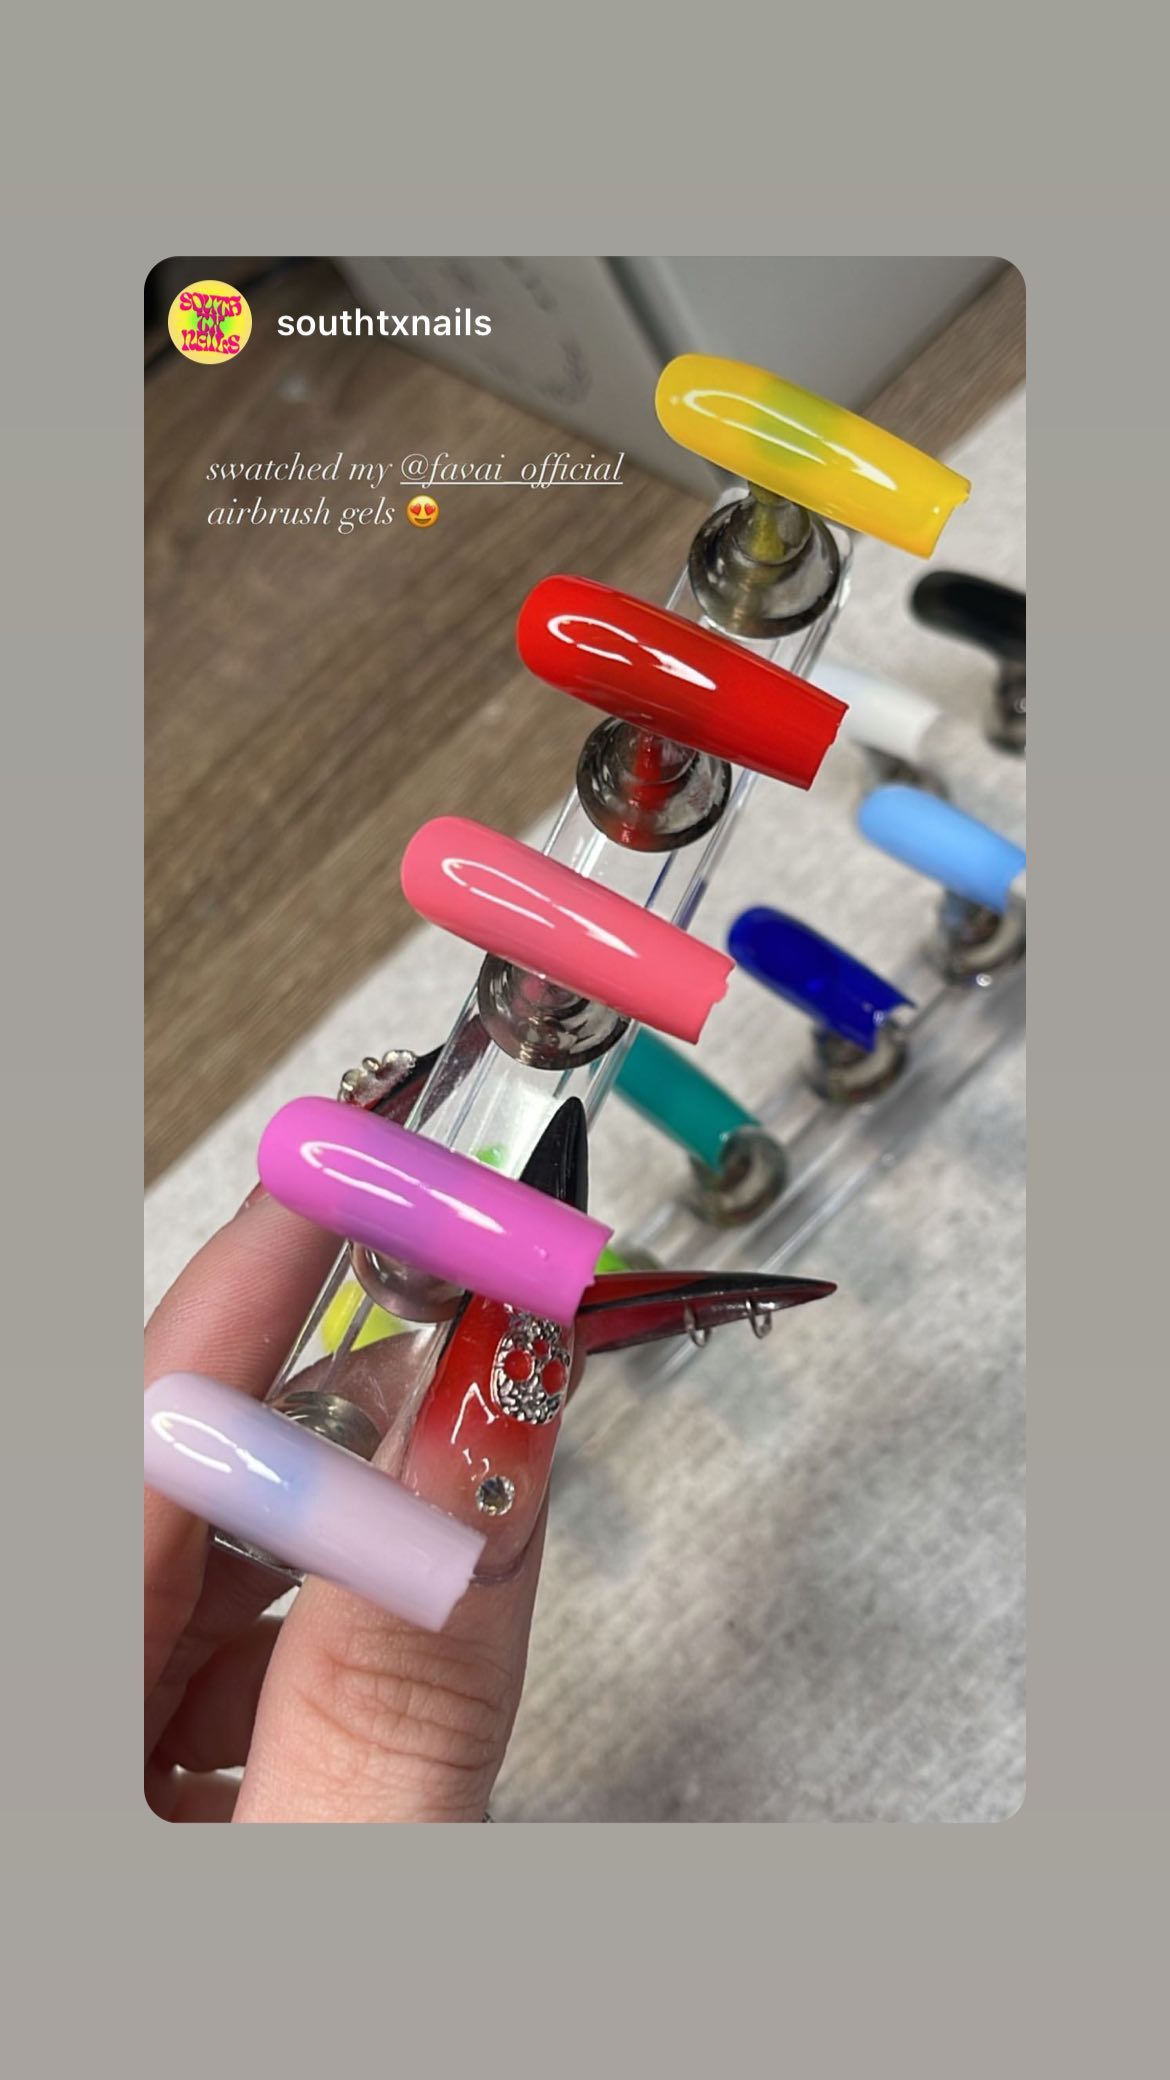 FAVAI AIRBRUSH GEL NAIL POLISH on Instagram: FAVAI NEW ARRIVAL🎉🎉🎉  GEL6-V 【Vintage Collection】 Visit WWW.FAVAIAIRBRUSH.COM to buy and try🛍️  #favaiairbrush #favaiairbrushnails #airbrushbeginner #airbrushnails  #airbrushnailart #airbrushed #nail